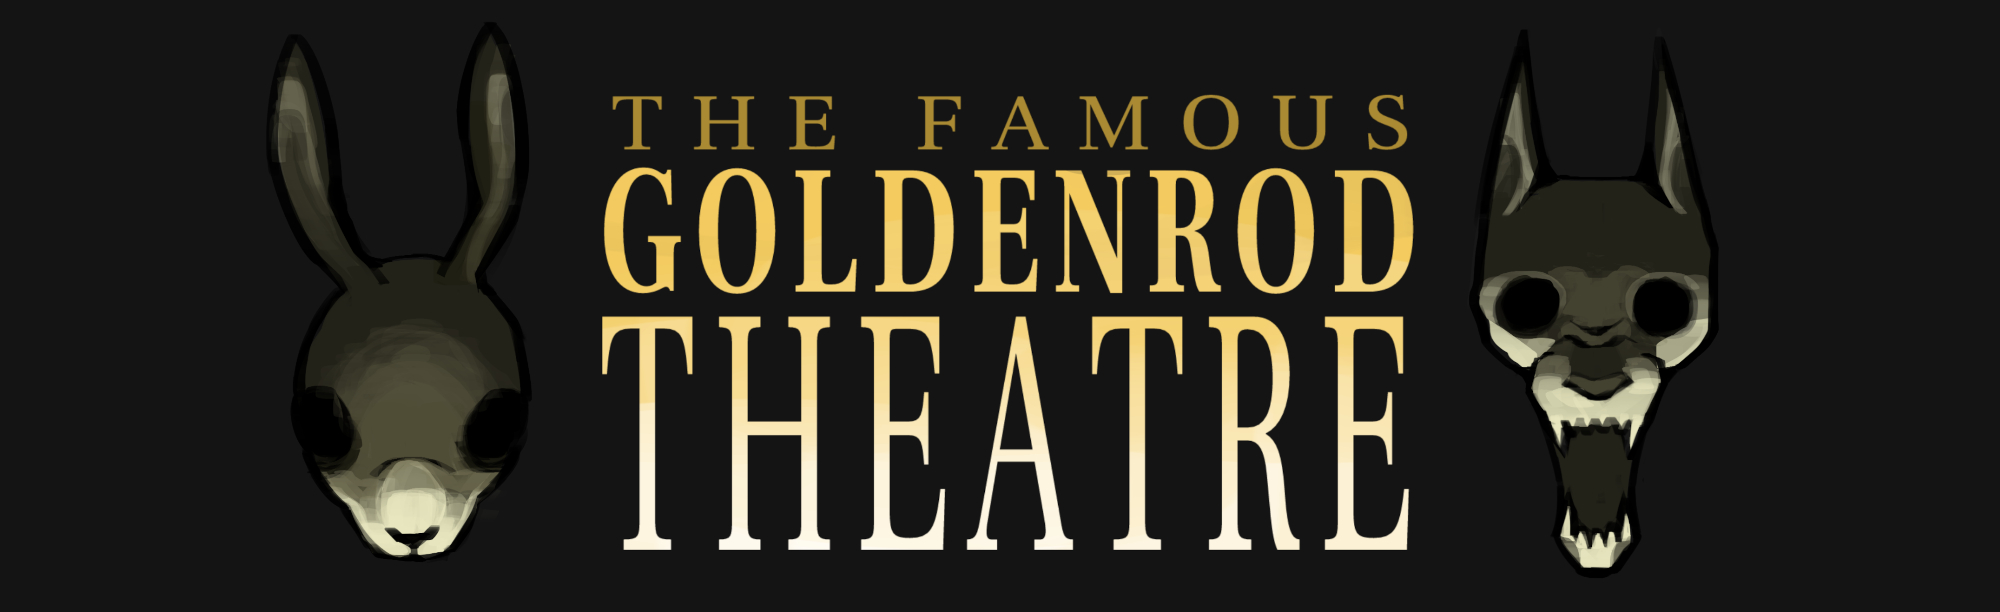 The Famous Goldenrod Theatre